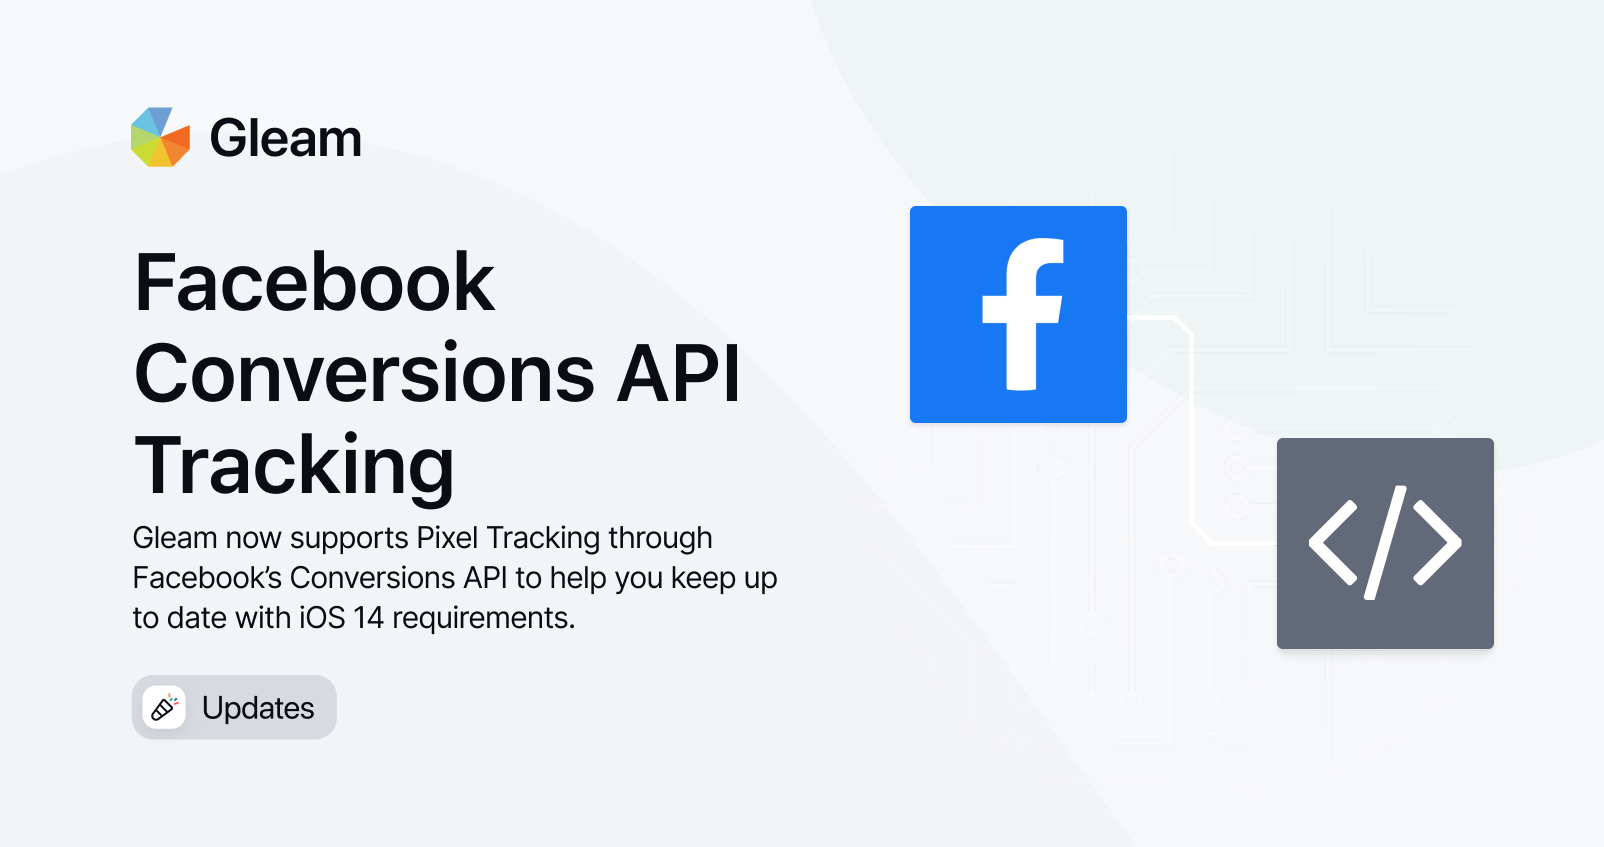 Support for Facebook Conversions API Tracking